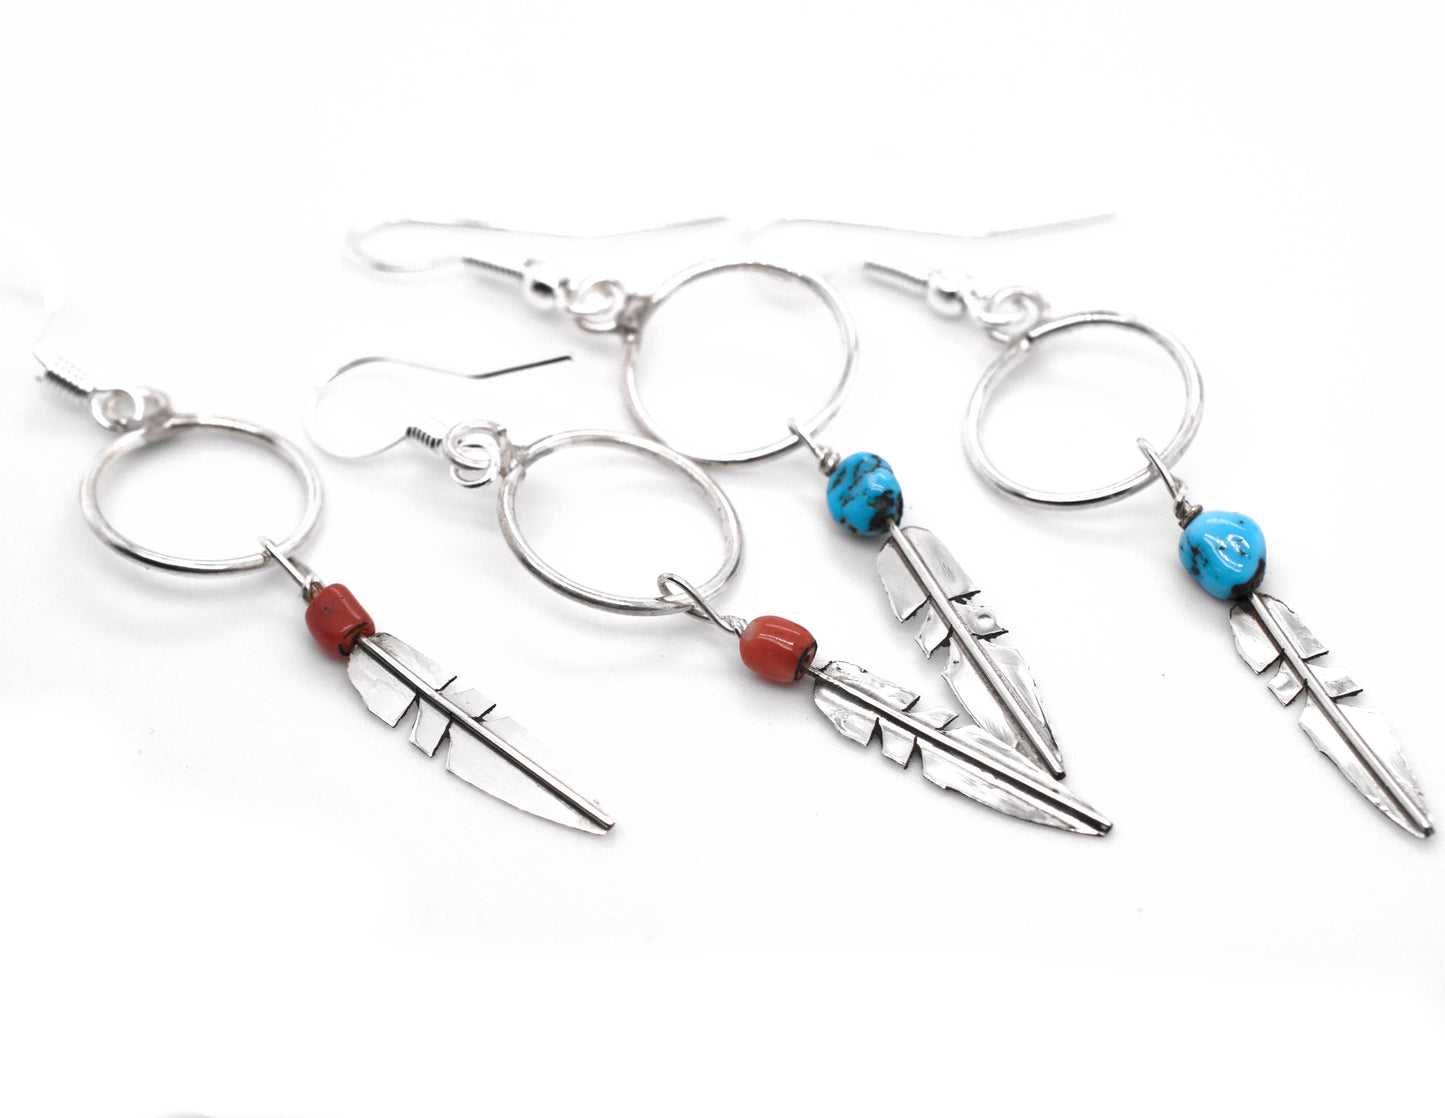 Super Silver's Delicate Zuni Feather Earrings with Coral and Turquoise Beads featuring turquoise accents.